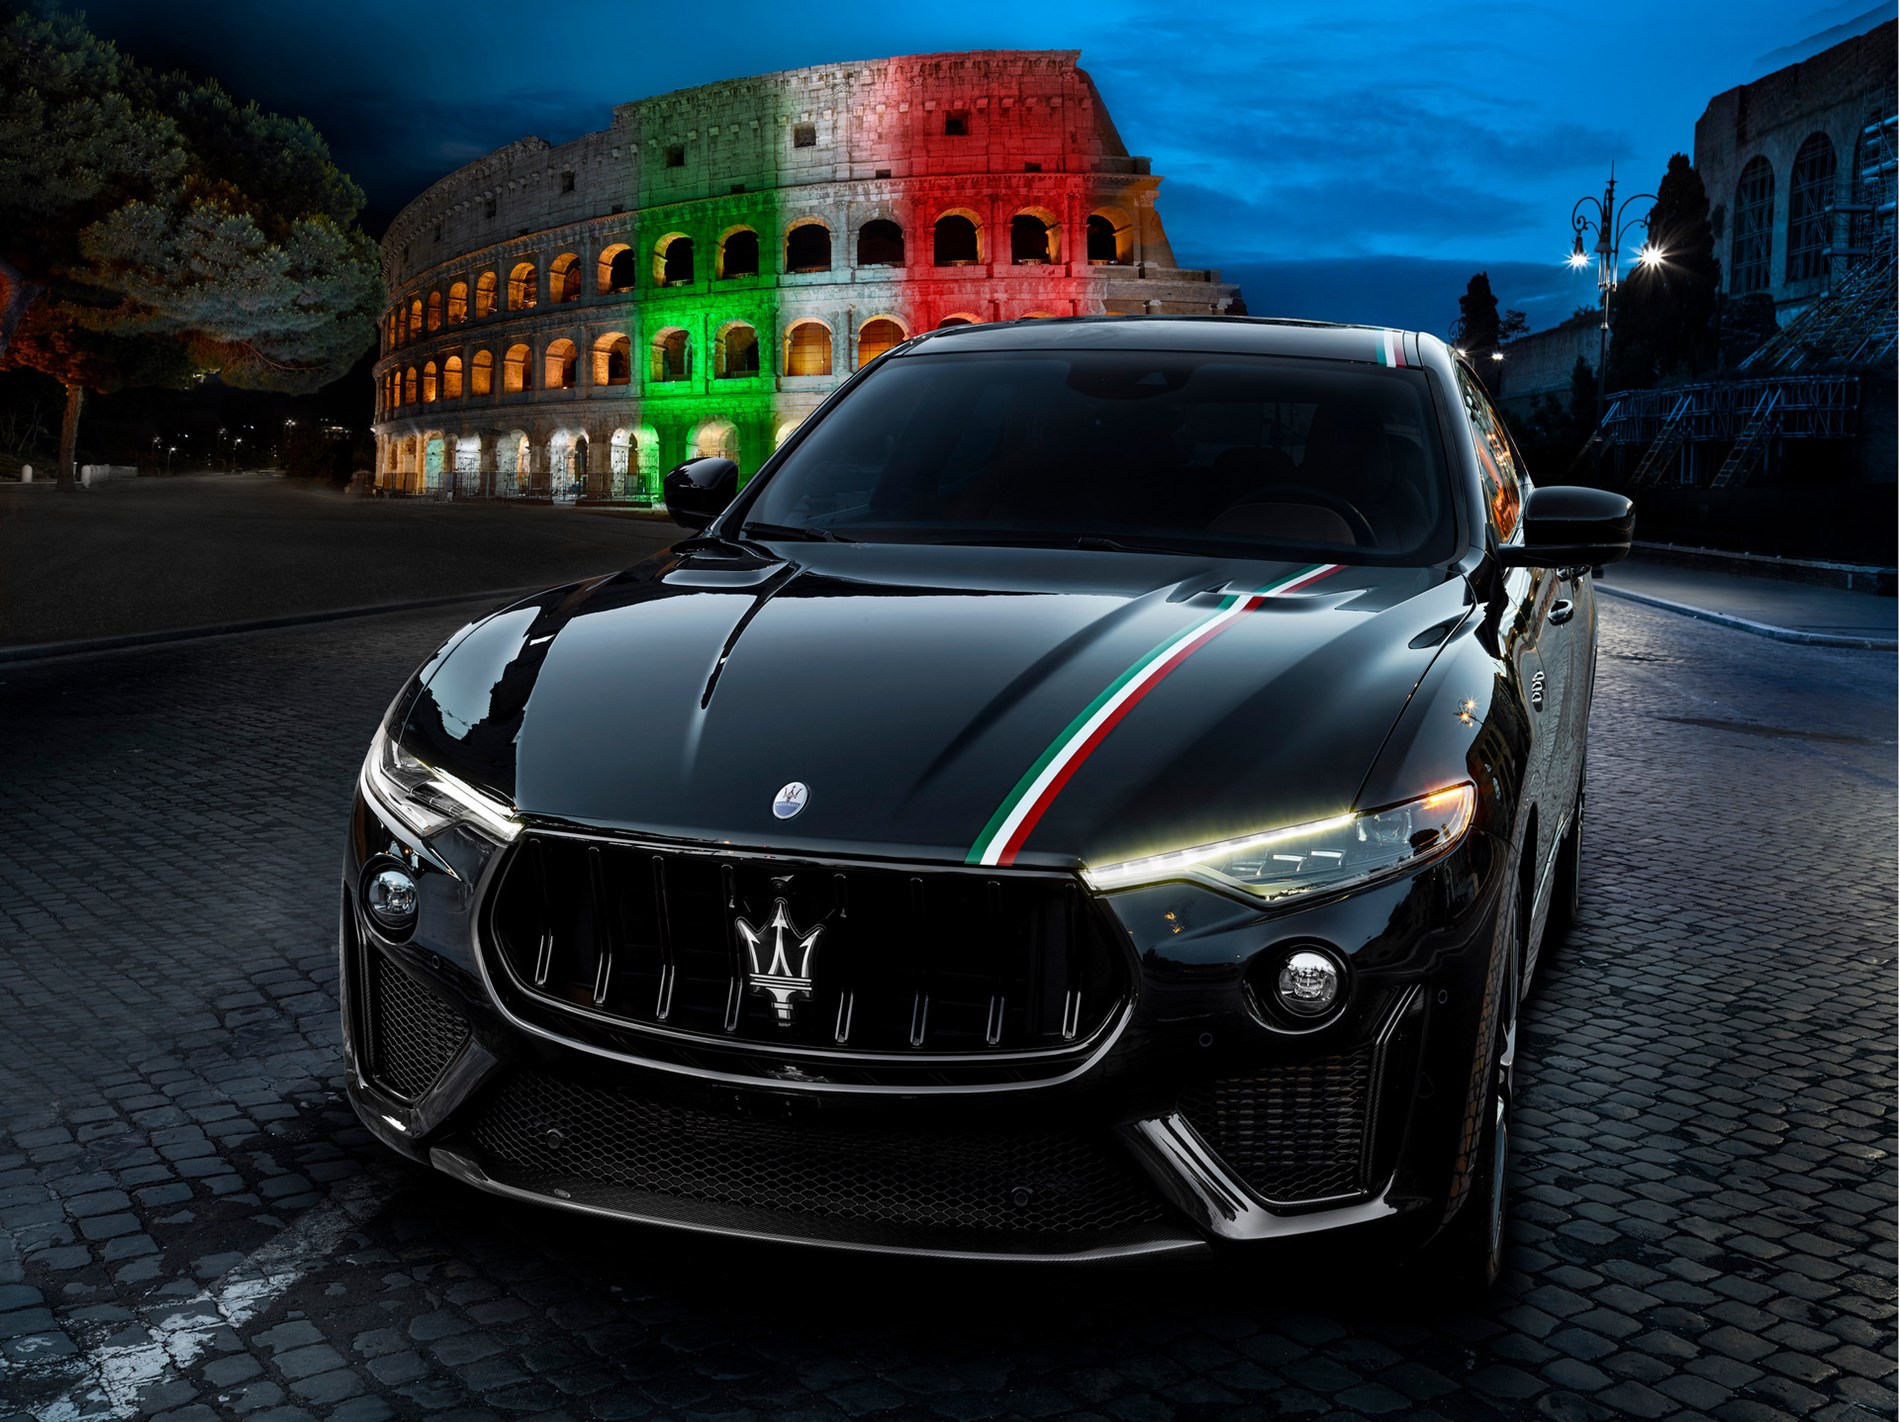 Maserati and the Italian tricolor, applied by hand. A project for renewal.